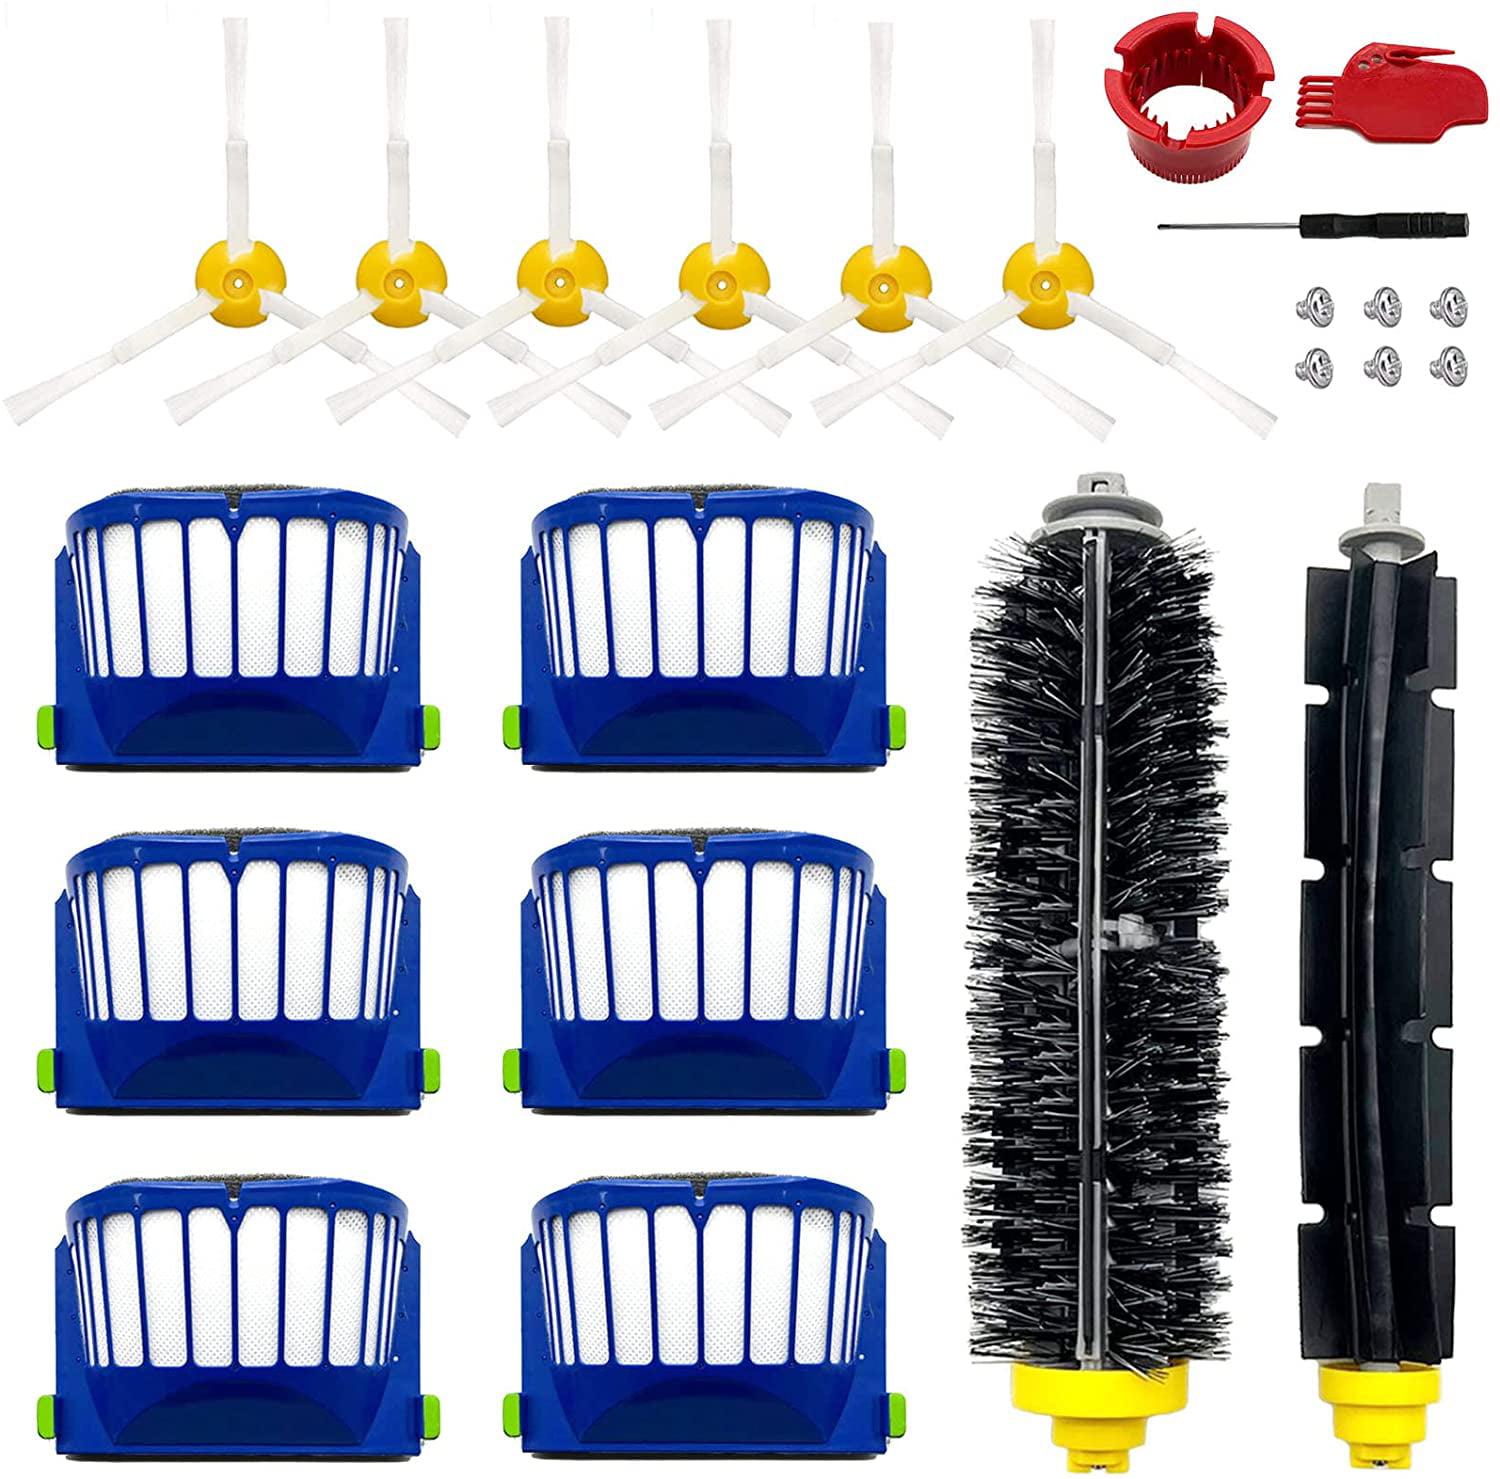 Vacuum Cleaner Replacement Parts Kit iRobot Roomba 600 655 595 620 660 680#US 